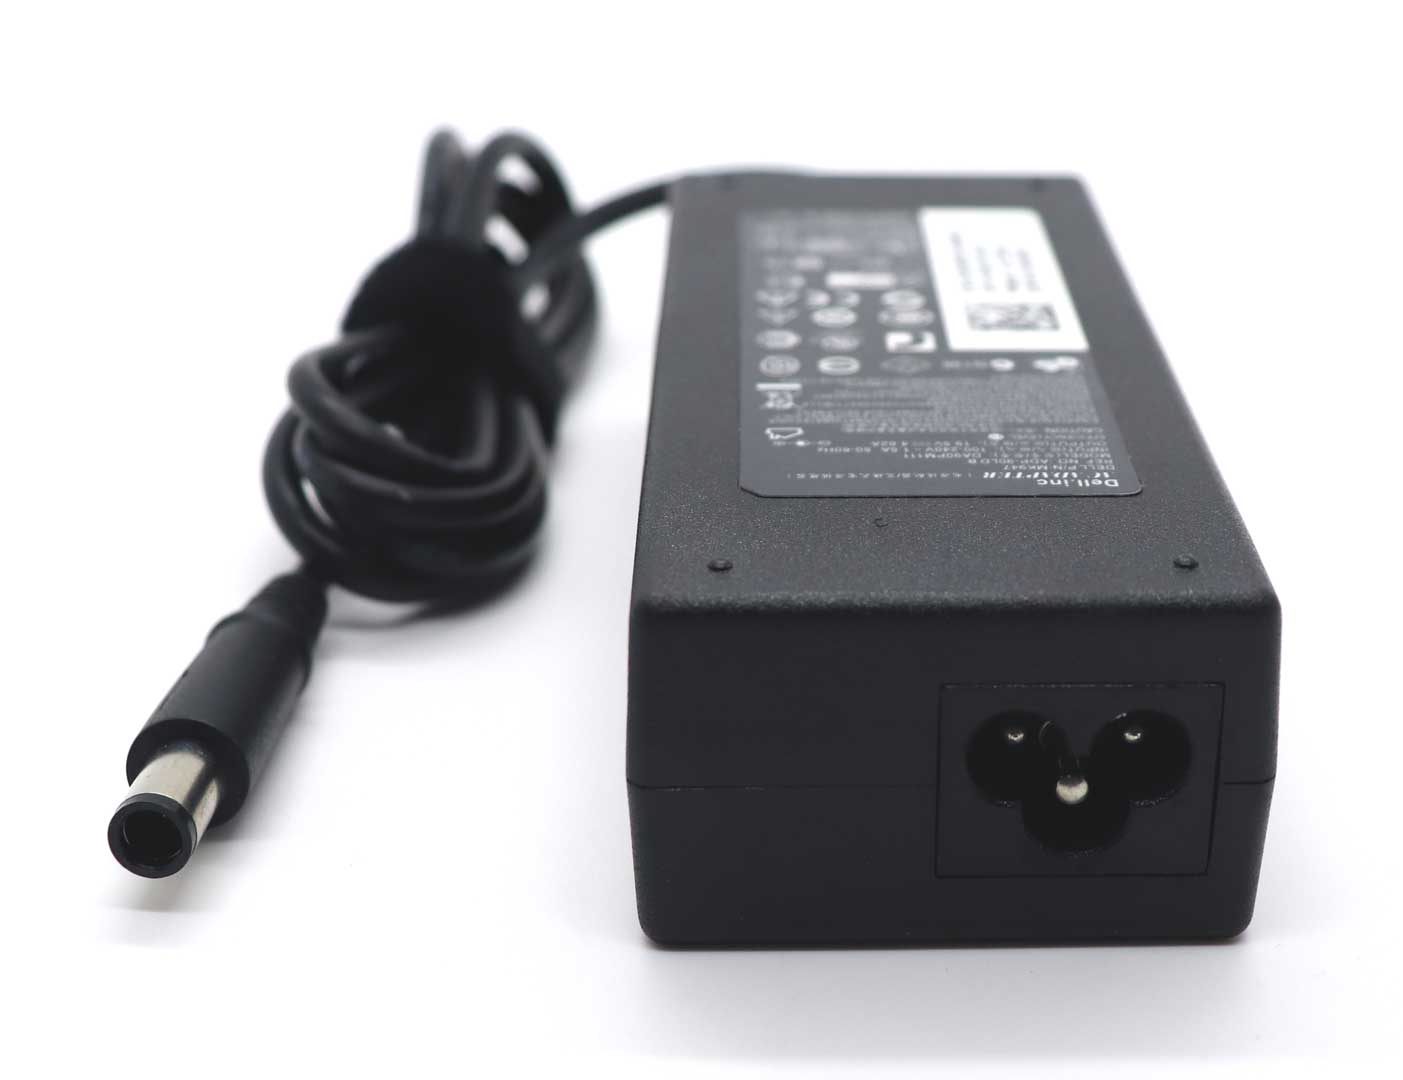 Dell XPS M1730 Original 90W 19.5V 4.62A7.4mm Pin Laptop Charger Adapter